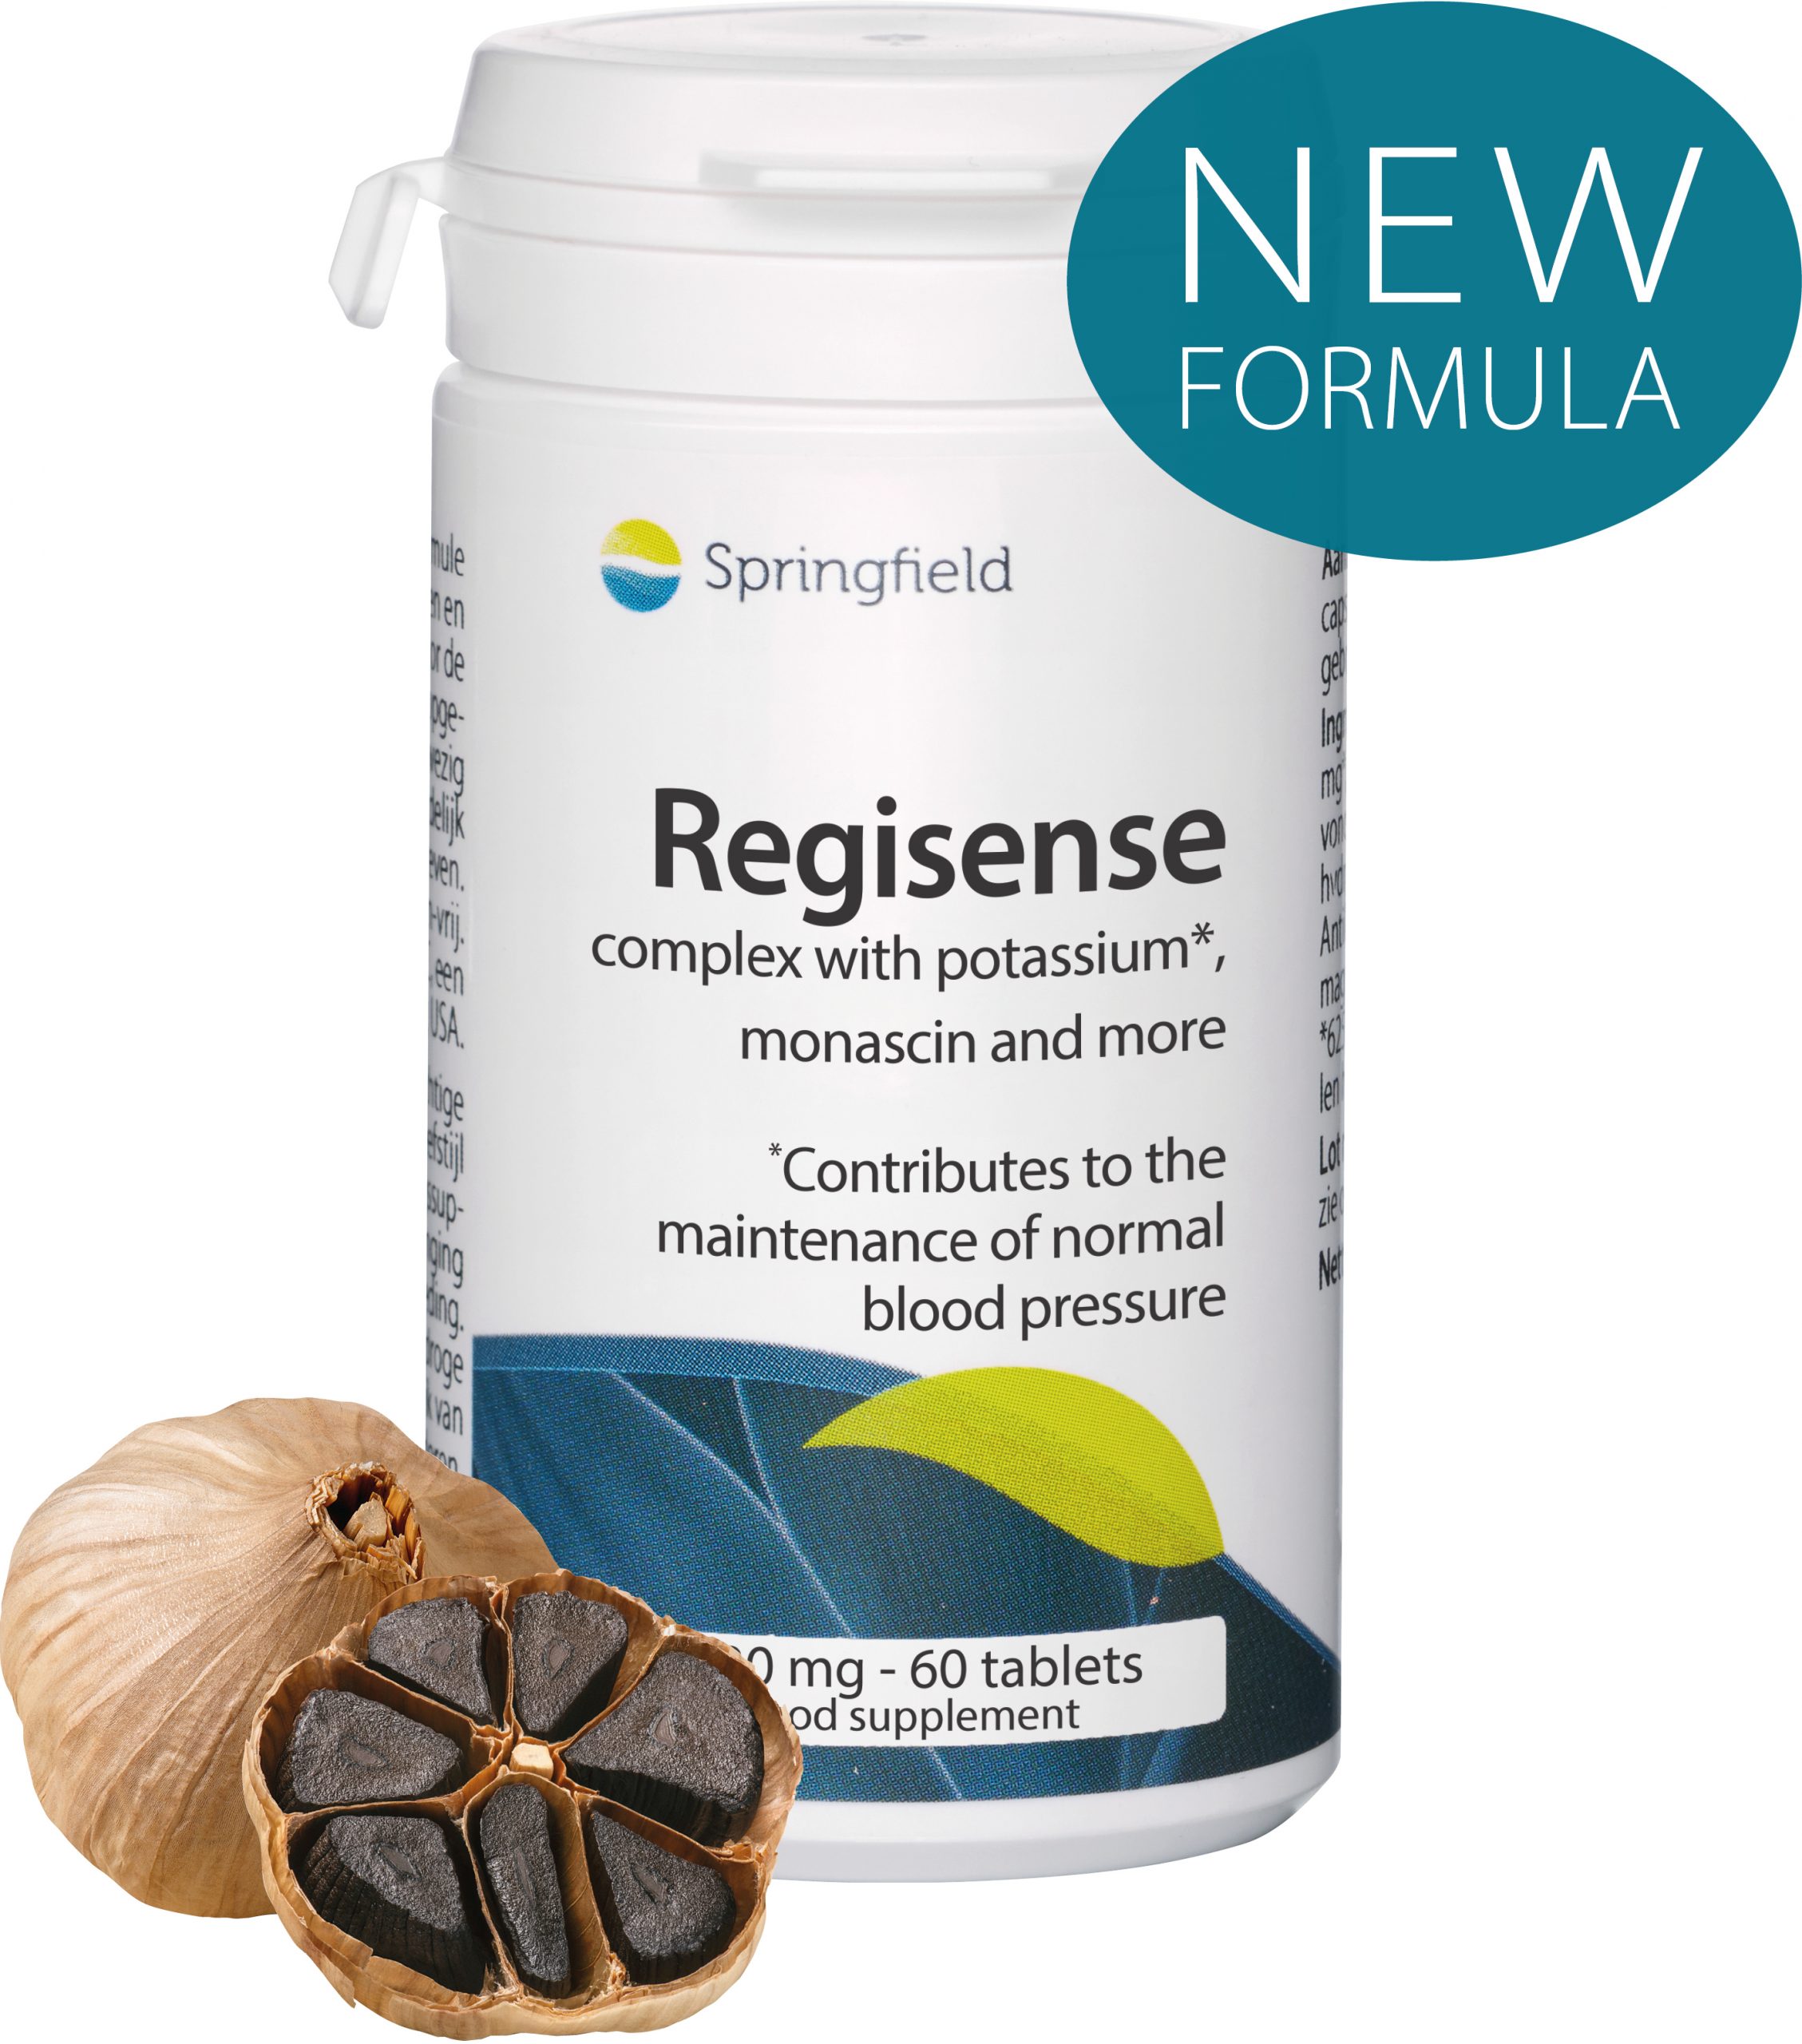 Regisense complexe with potassium contributes to the maintenance of normal blood pressure - new